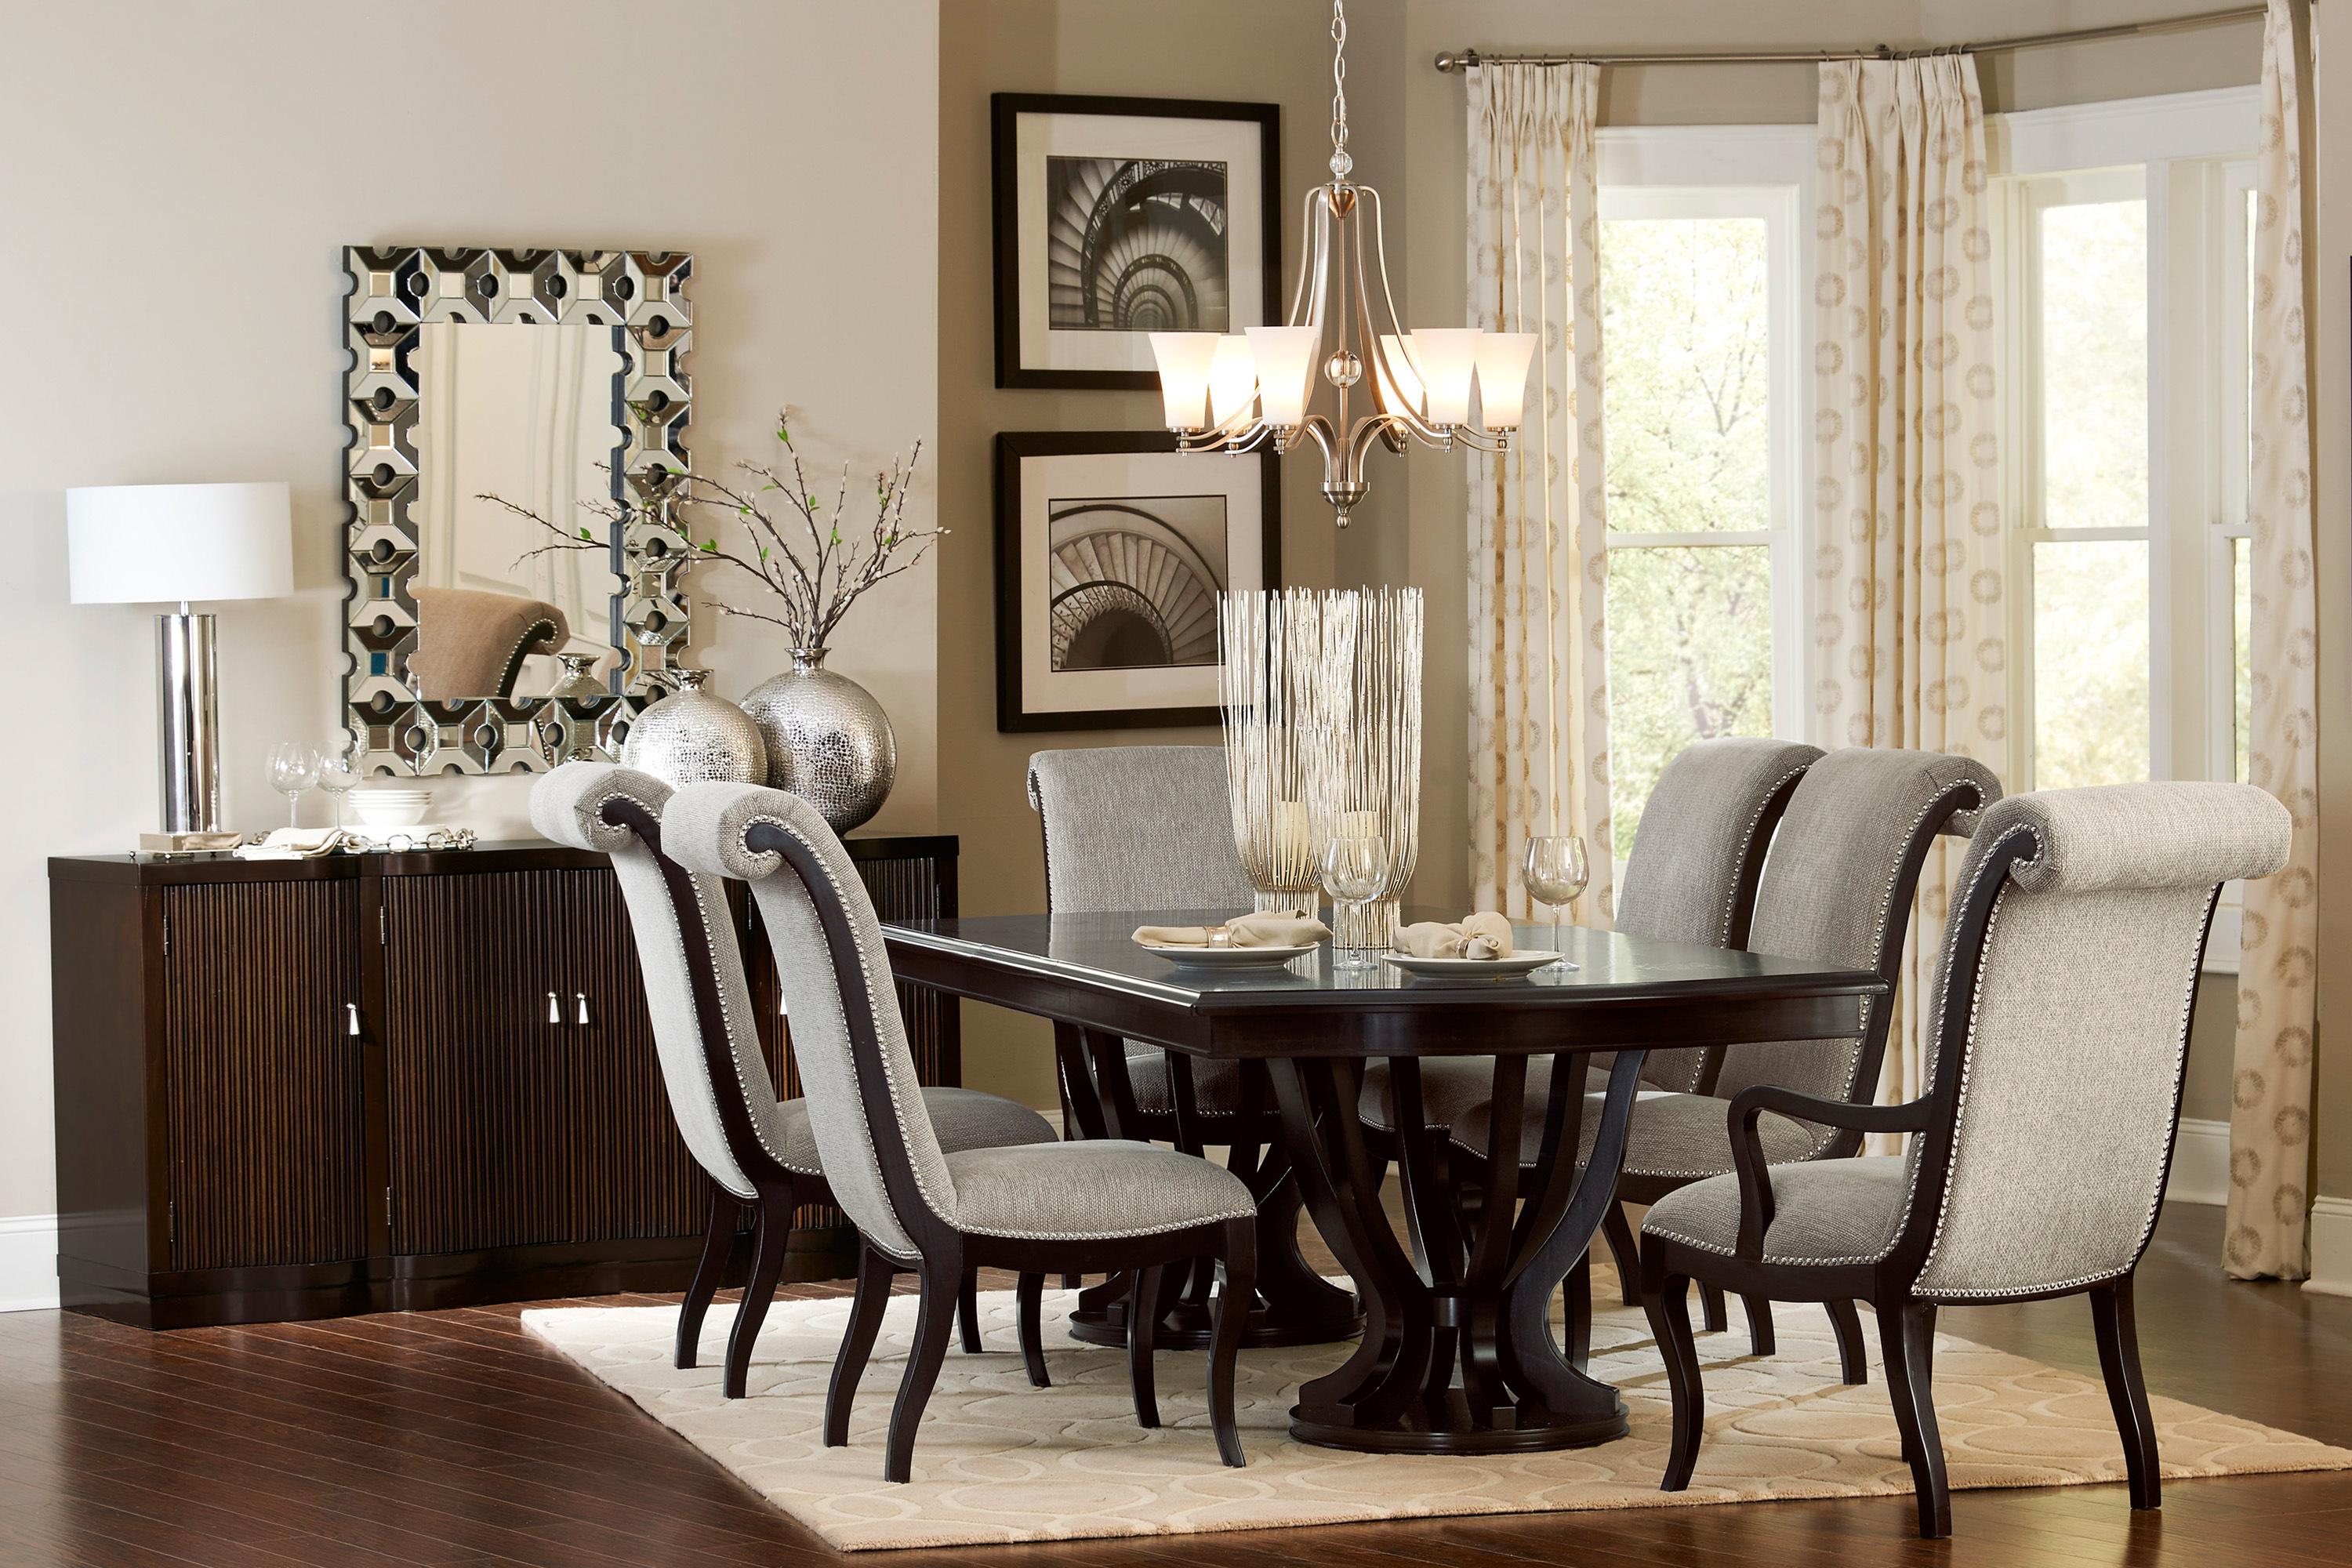 Contemporary Dining Room Set 5494-106*8PC Savion 5494-106*8PC in Espresso Faux Leather